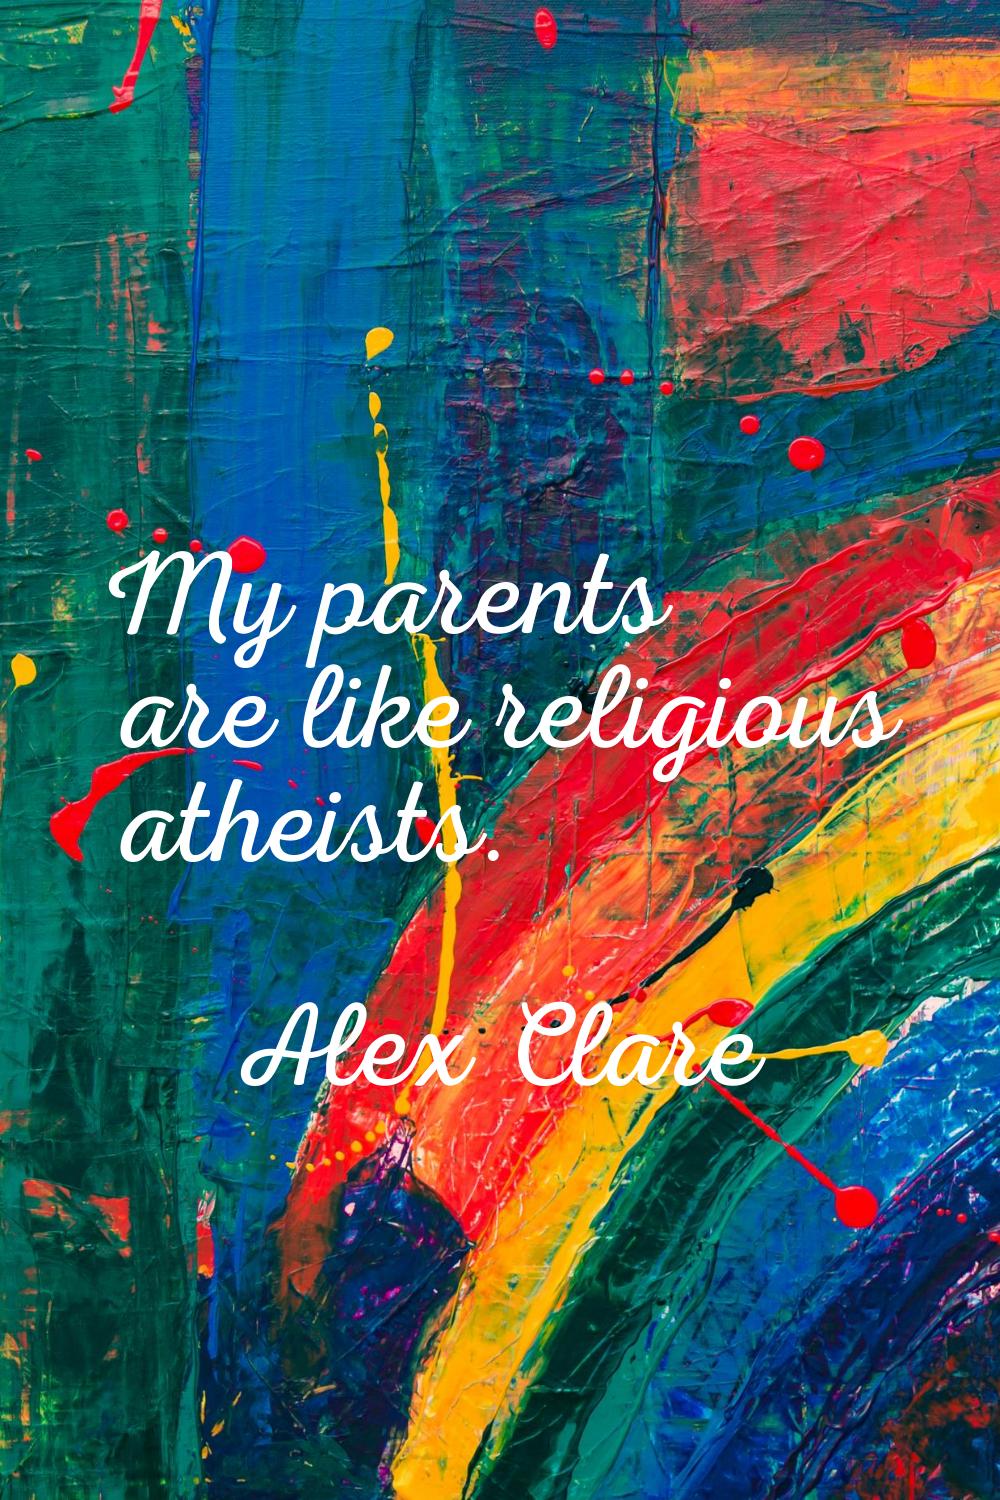 My parents are like religious atheists.